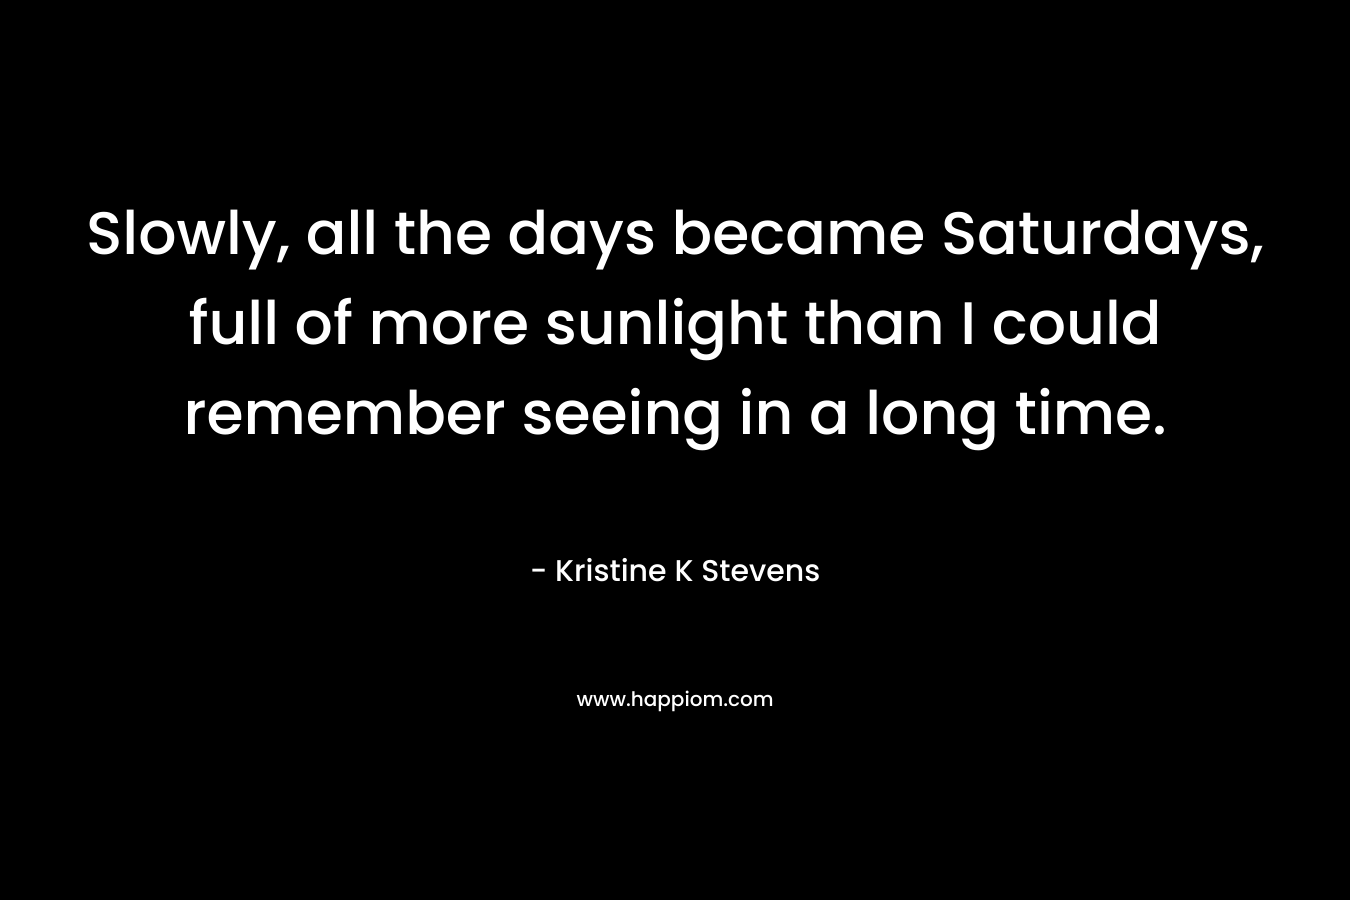 Slowly, all the days became Saturdays, full of more sunlight than I could remember seeing in a long time. – Kristine K Stevens